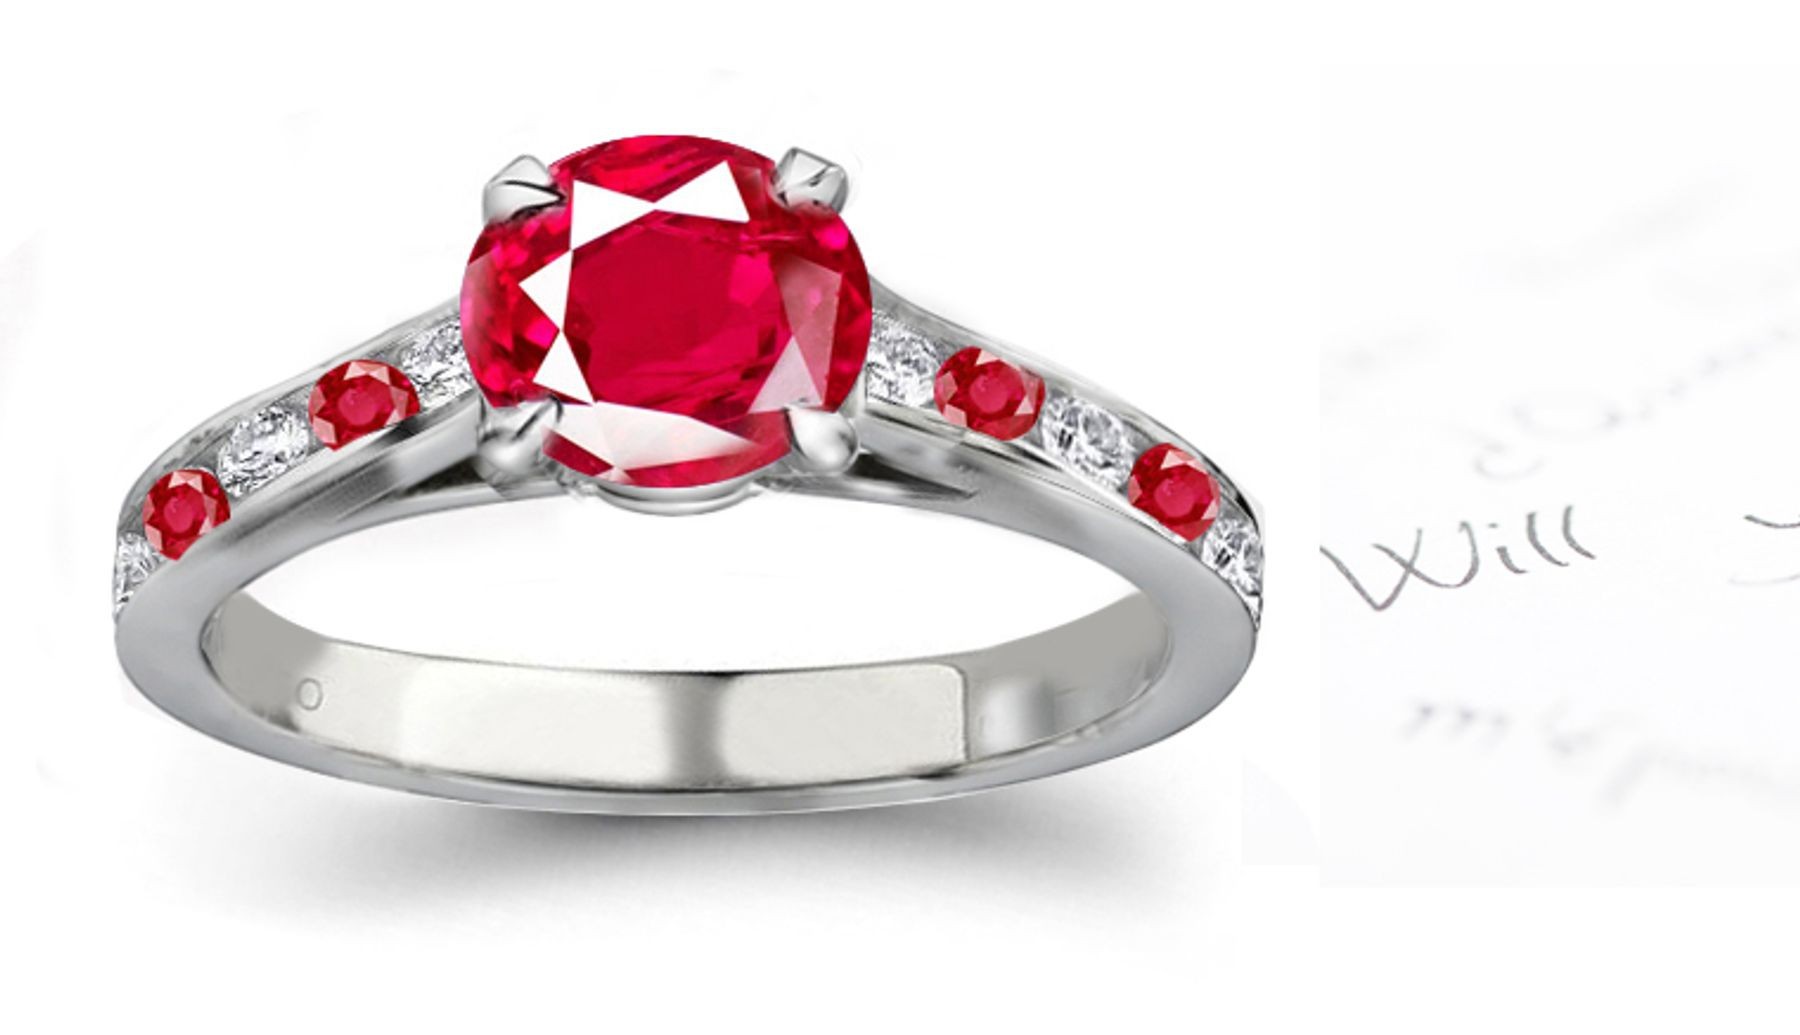 Gems & Precious Stones: Sweet, Simple, Eternal, Stylish, Very Well-Cut Stone Large Top Round Ruby Ring with Ruby & Diamond Placed on in Gold